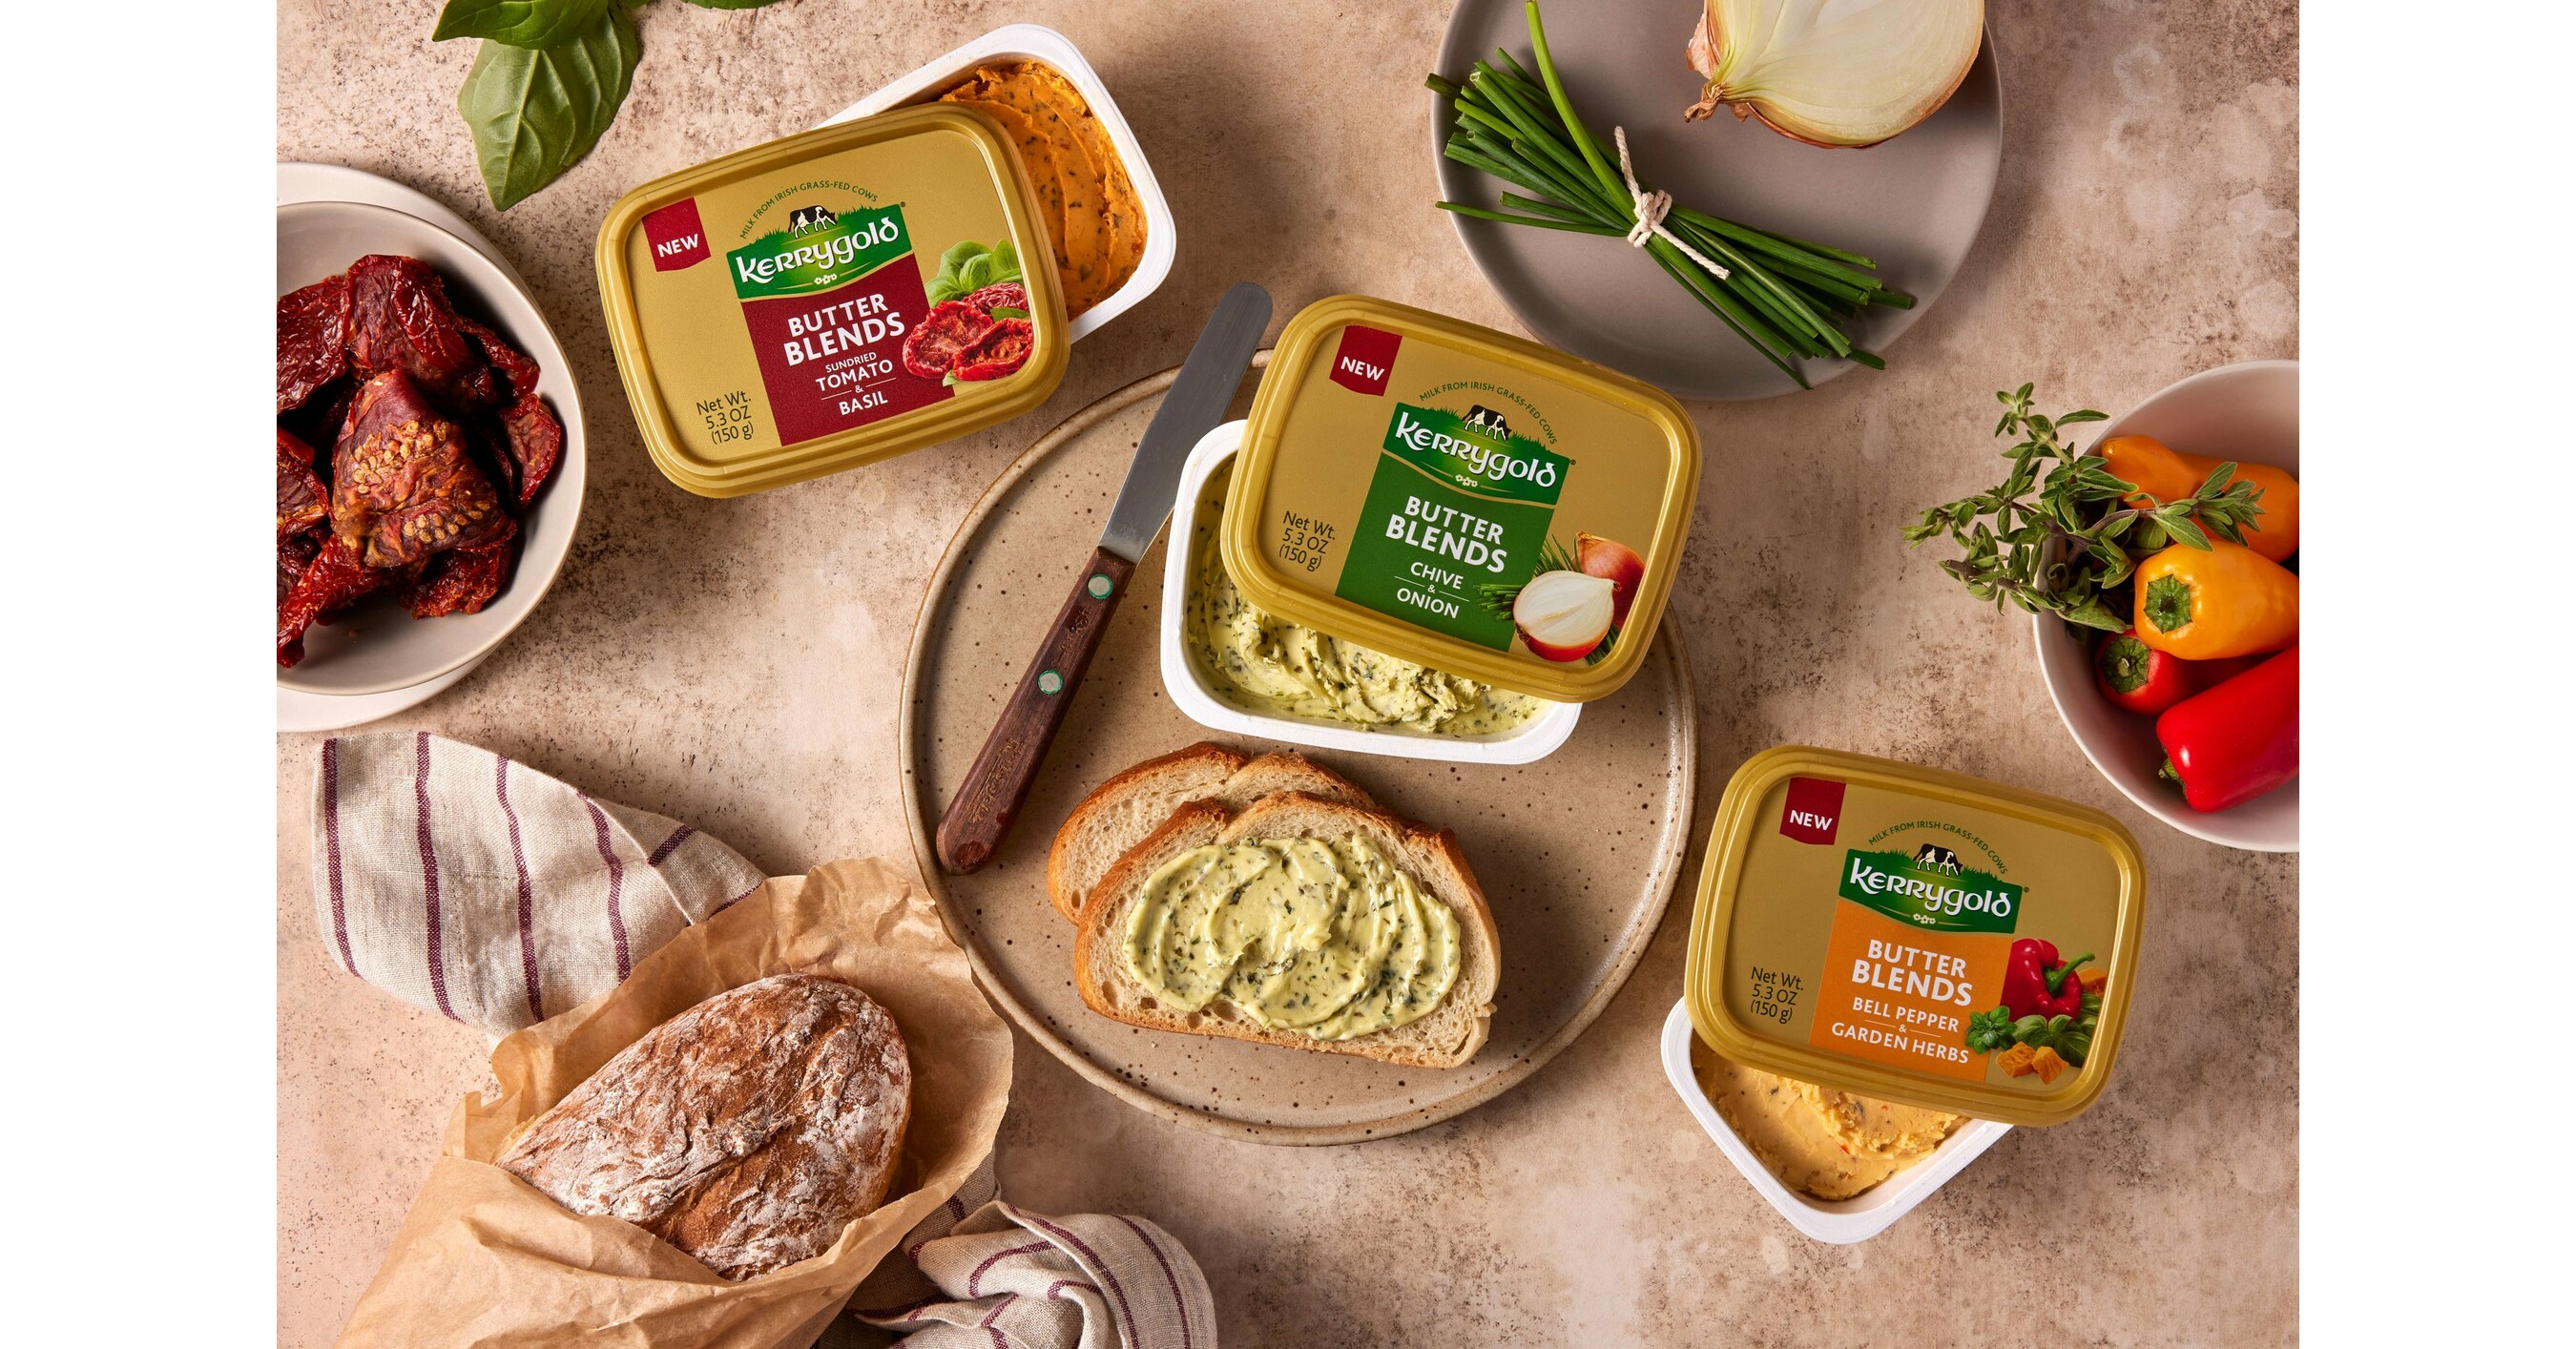 Kerrygold launches Irish butter with olive oil, 2021-02-26